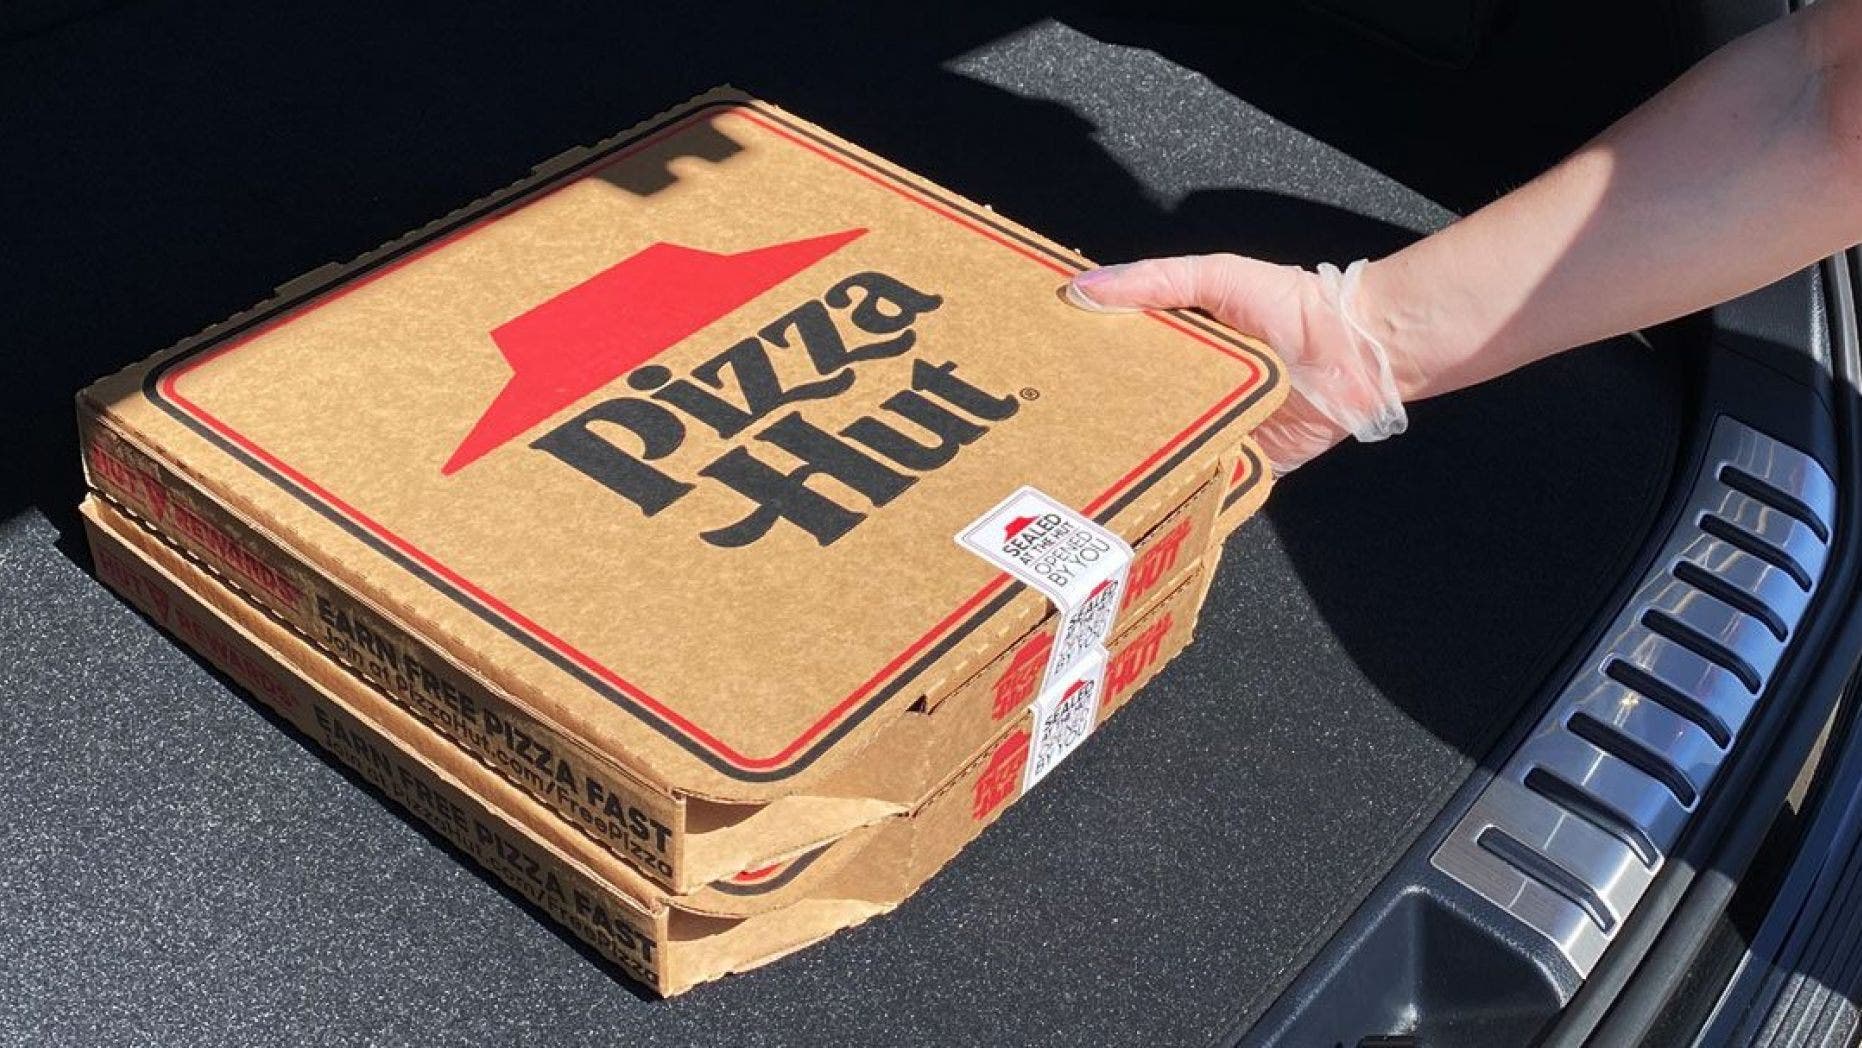 Bankruptcy franchisee of Pizza Hut, Wendy’s restaurants, bought by large group